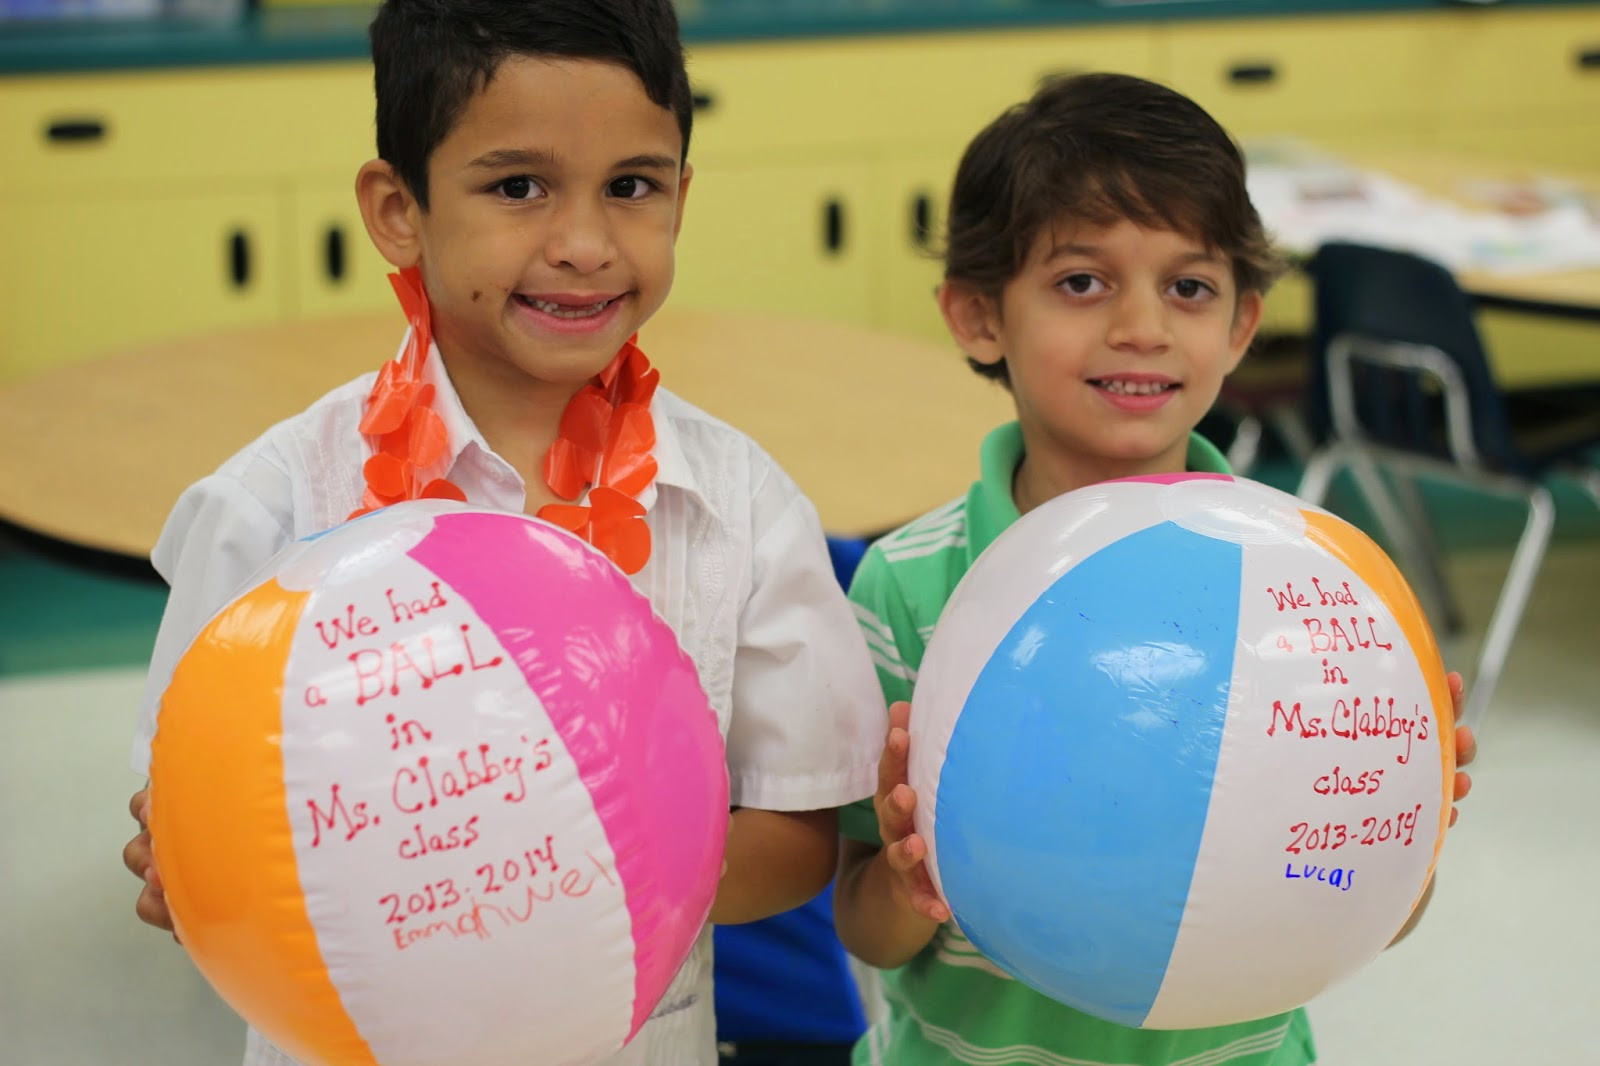 Beach Party Ideas For Kindergarten
 The Ultimate Roundup of End of the Year Party Ideas